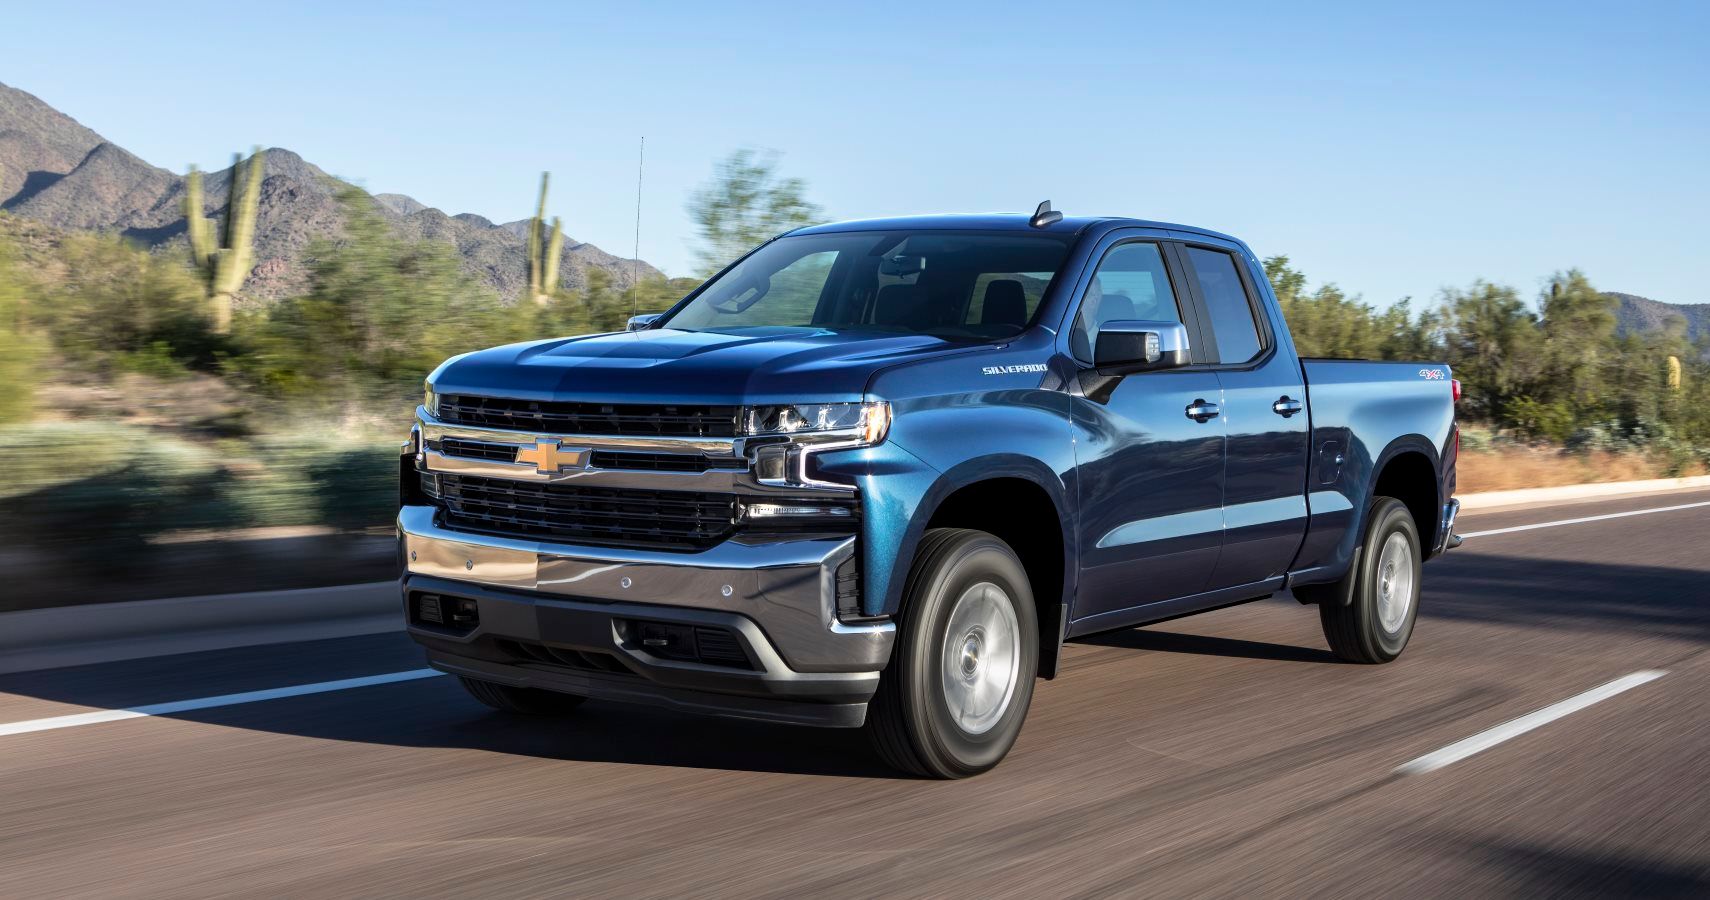 Many New Chevy Silverados Somehow Has Worse MPG Than Previous Generation